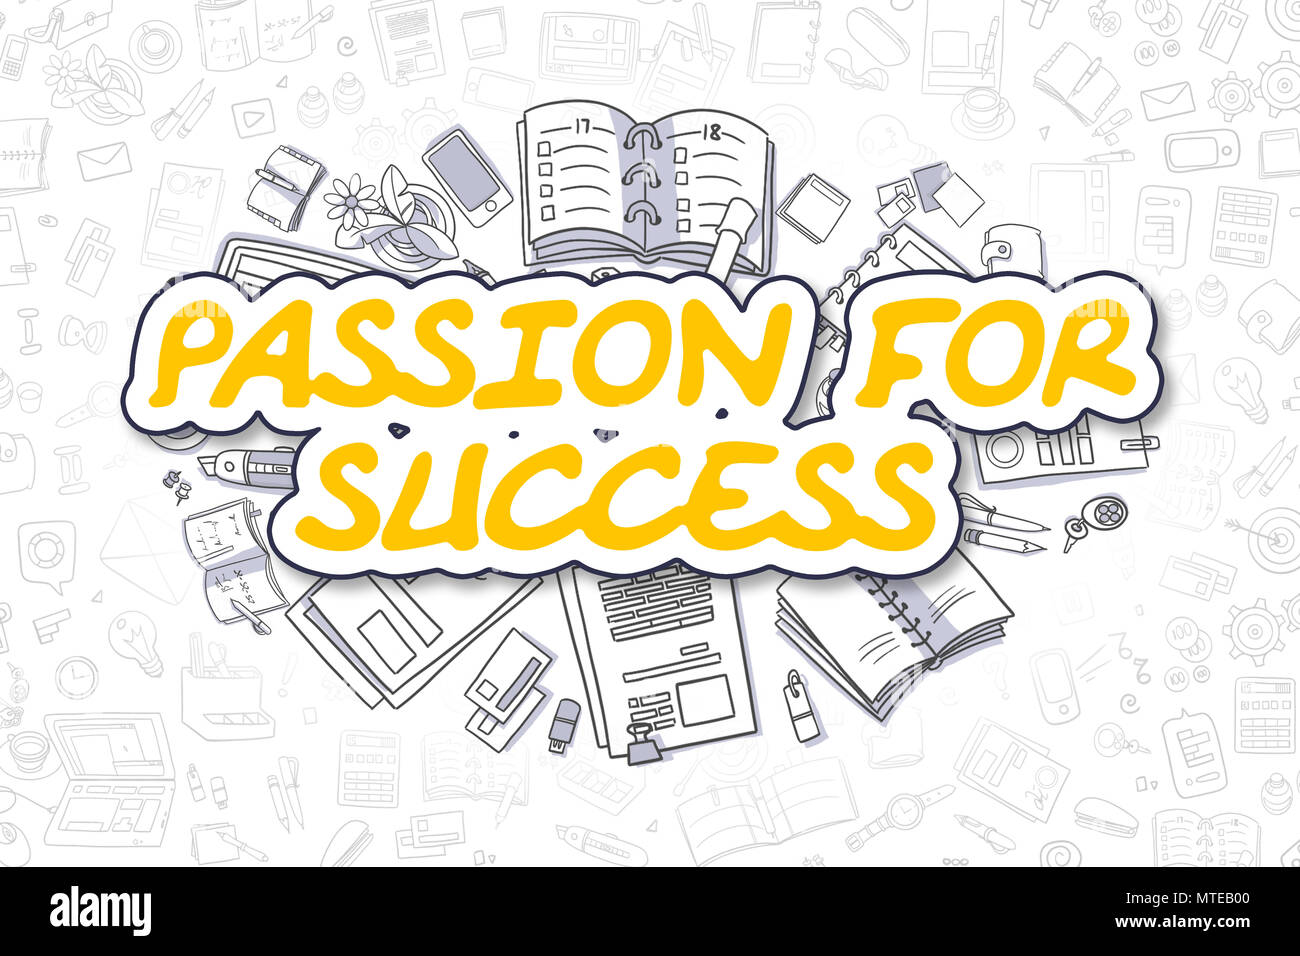 Passion For Success - Doodle Yellow Word. Business Concept. Stock Photo